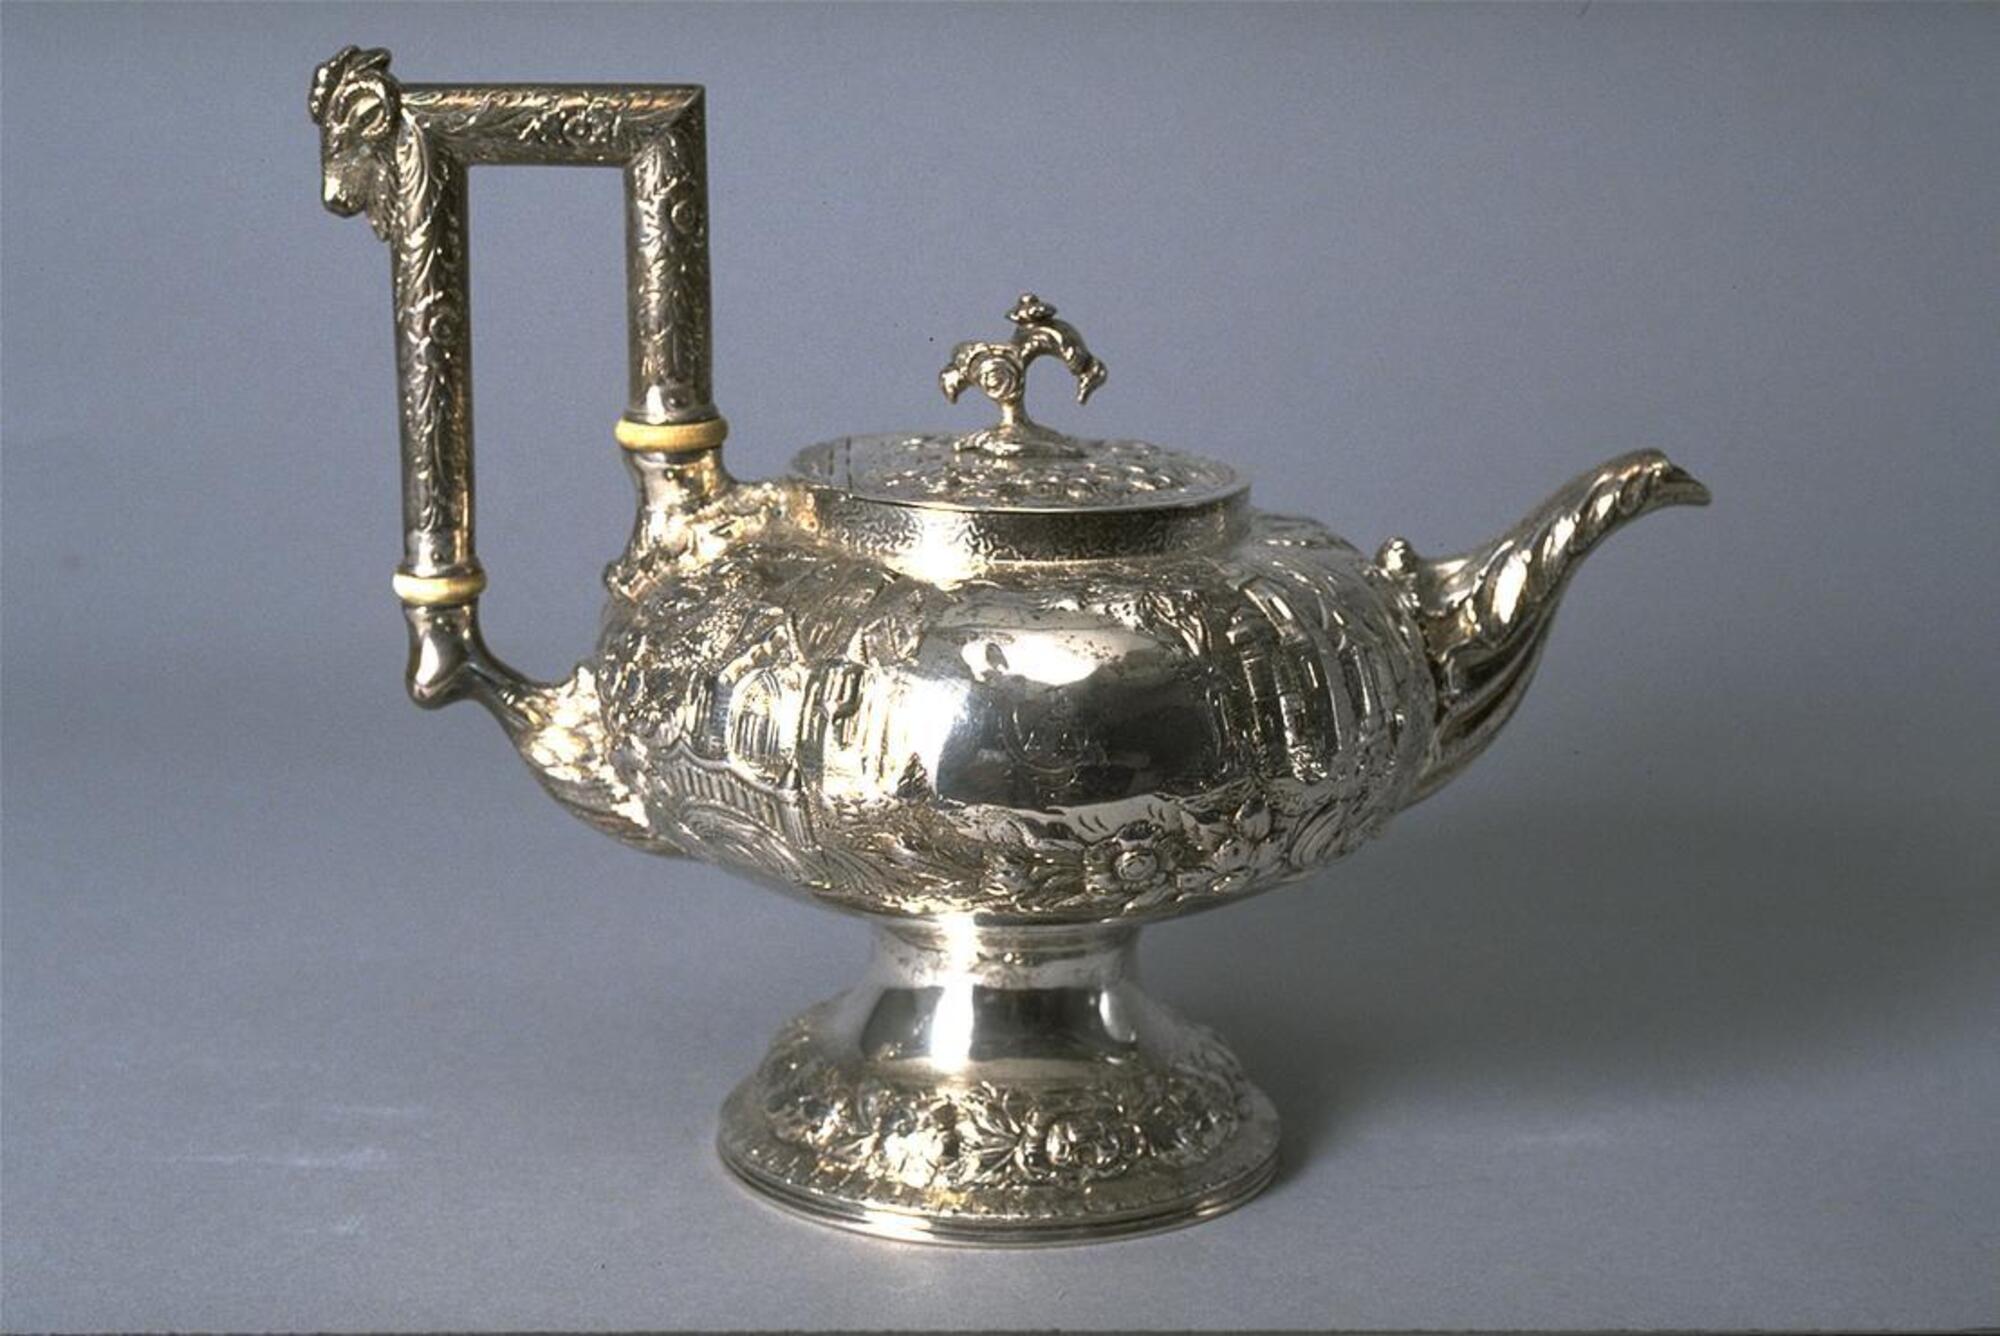 Short, squat silver pot with short spout, finial-topped lid, tall square handle and opulent repouss&eacute; decoration